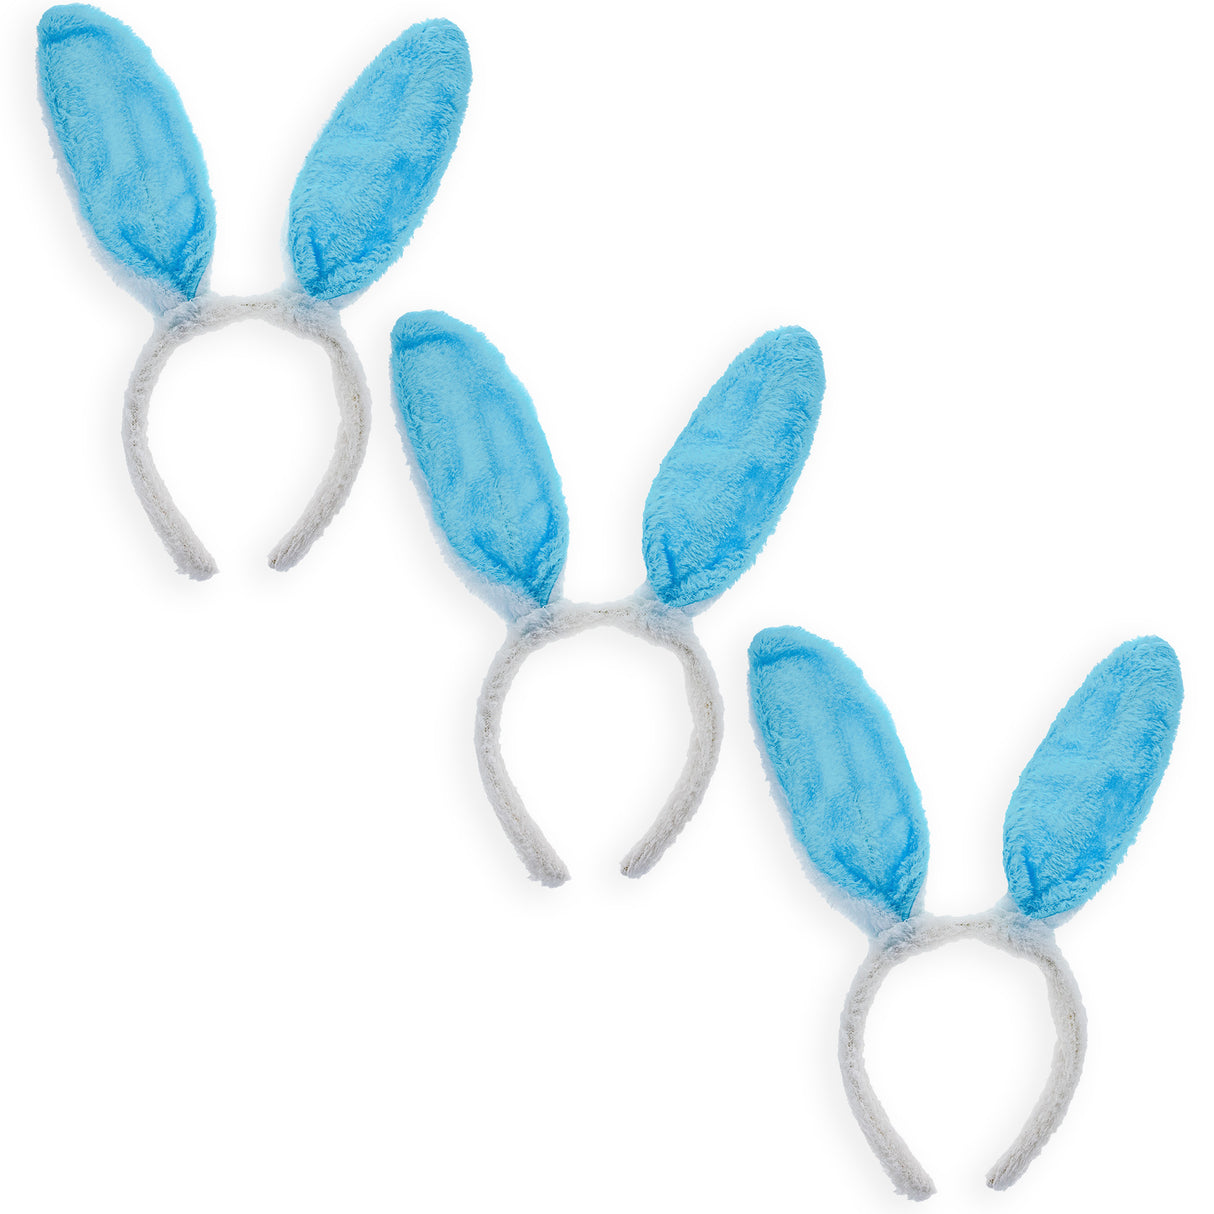 Set of 3 Blue Fabric Bunny Ear Headbands, Each 11.7 Inches in Blue color,  shape